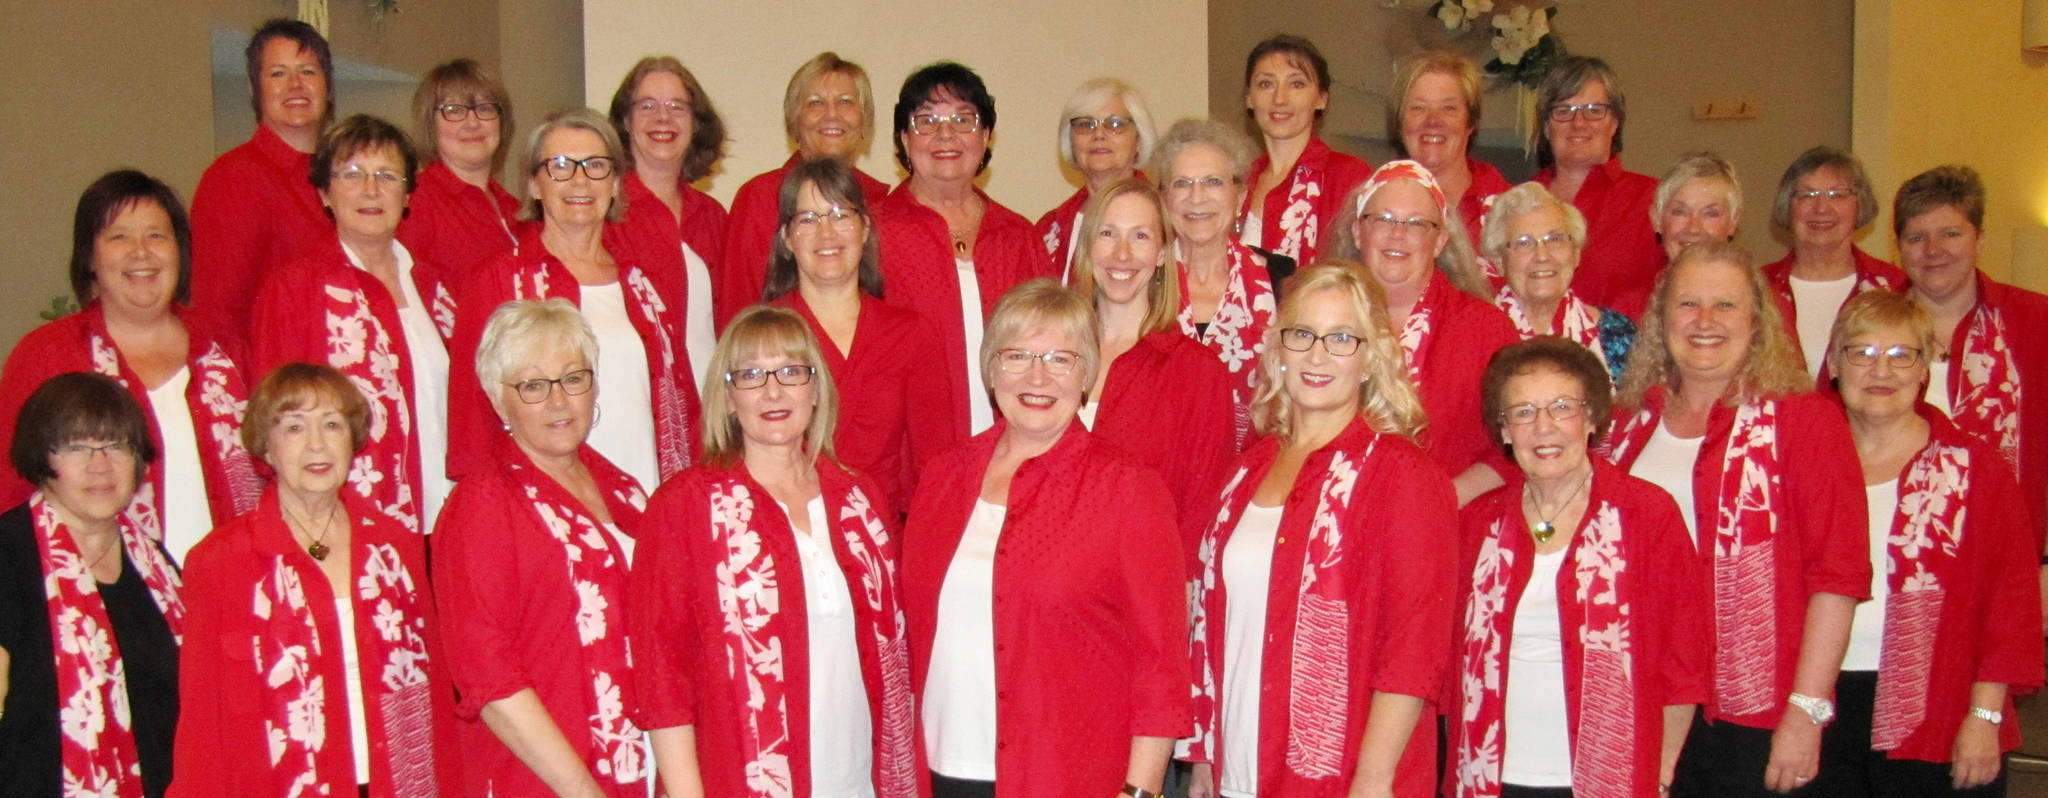 Hearts of Harmony to perform at ‘First Friday’ Aug. 3rd